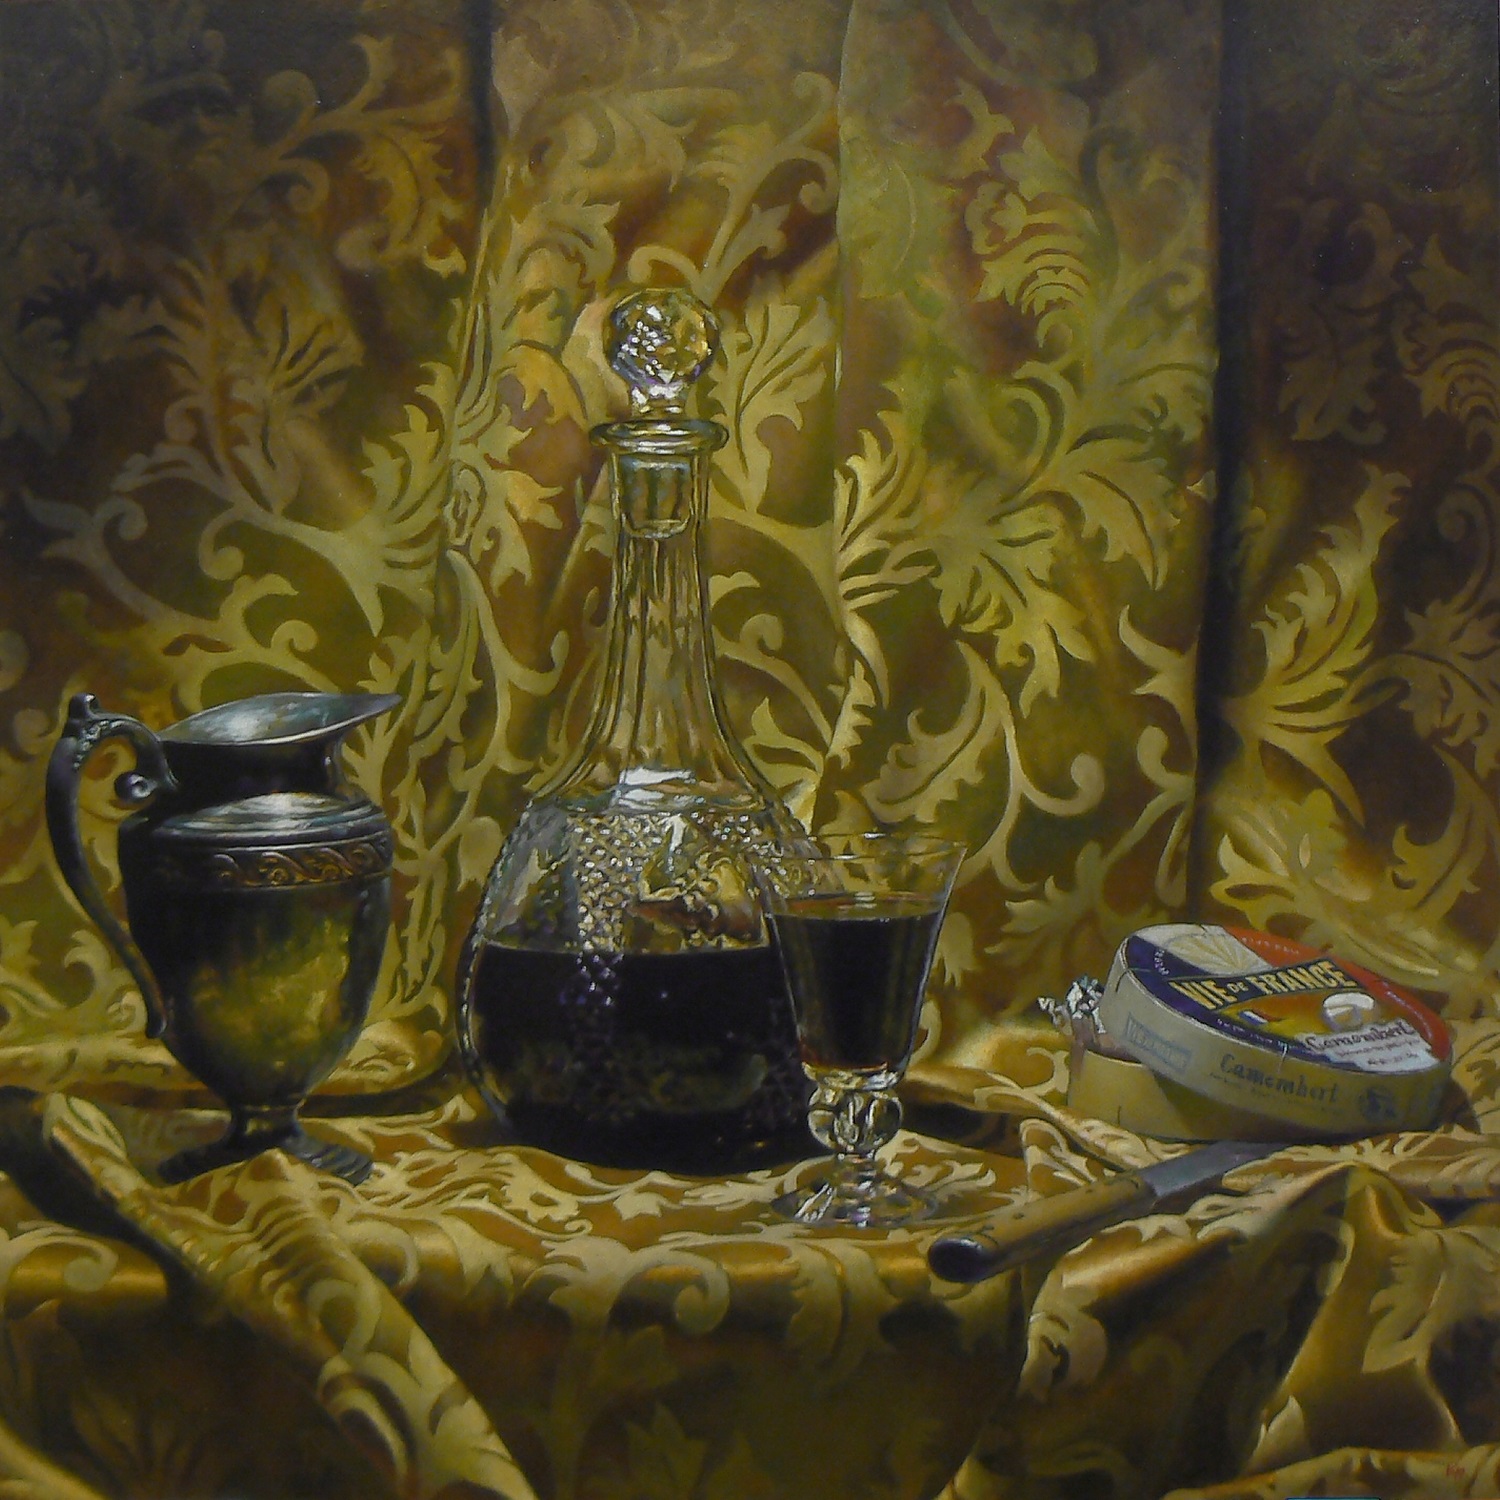 "Silver, Wine, and Cheese", oil on panel, 24x24 inches